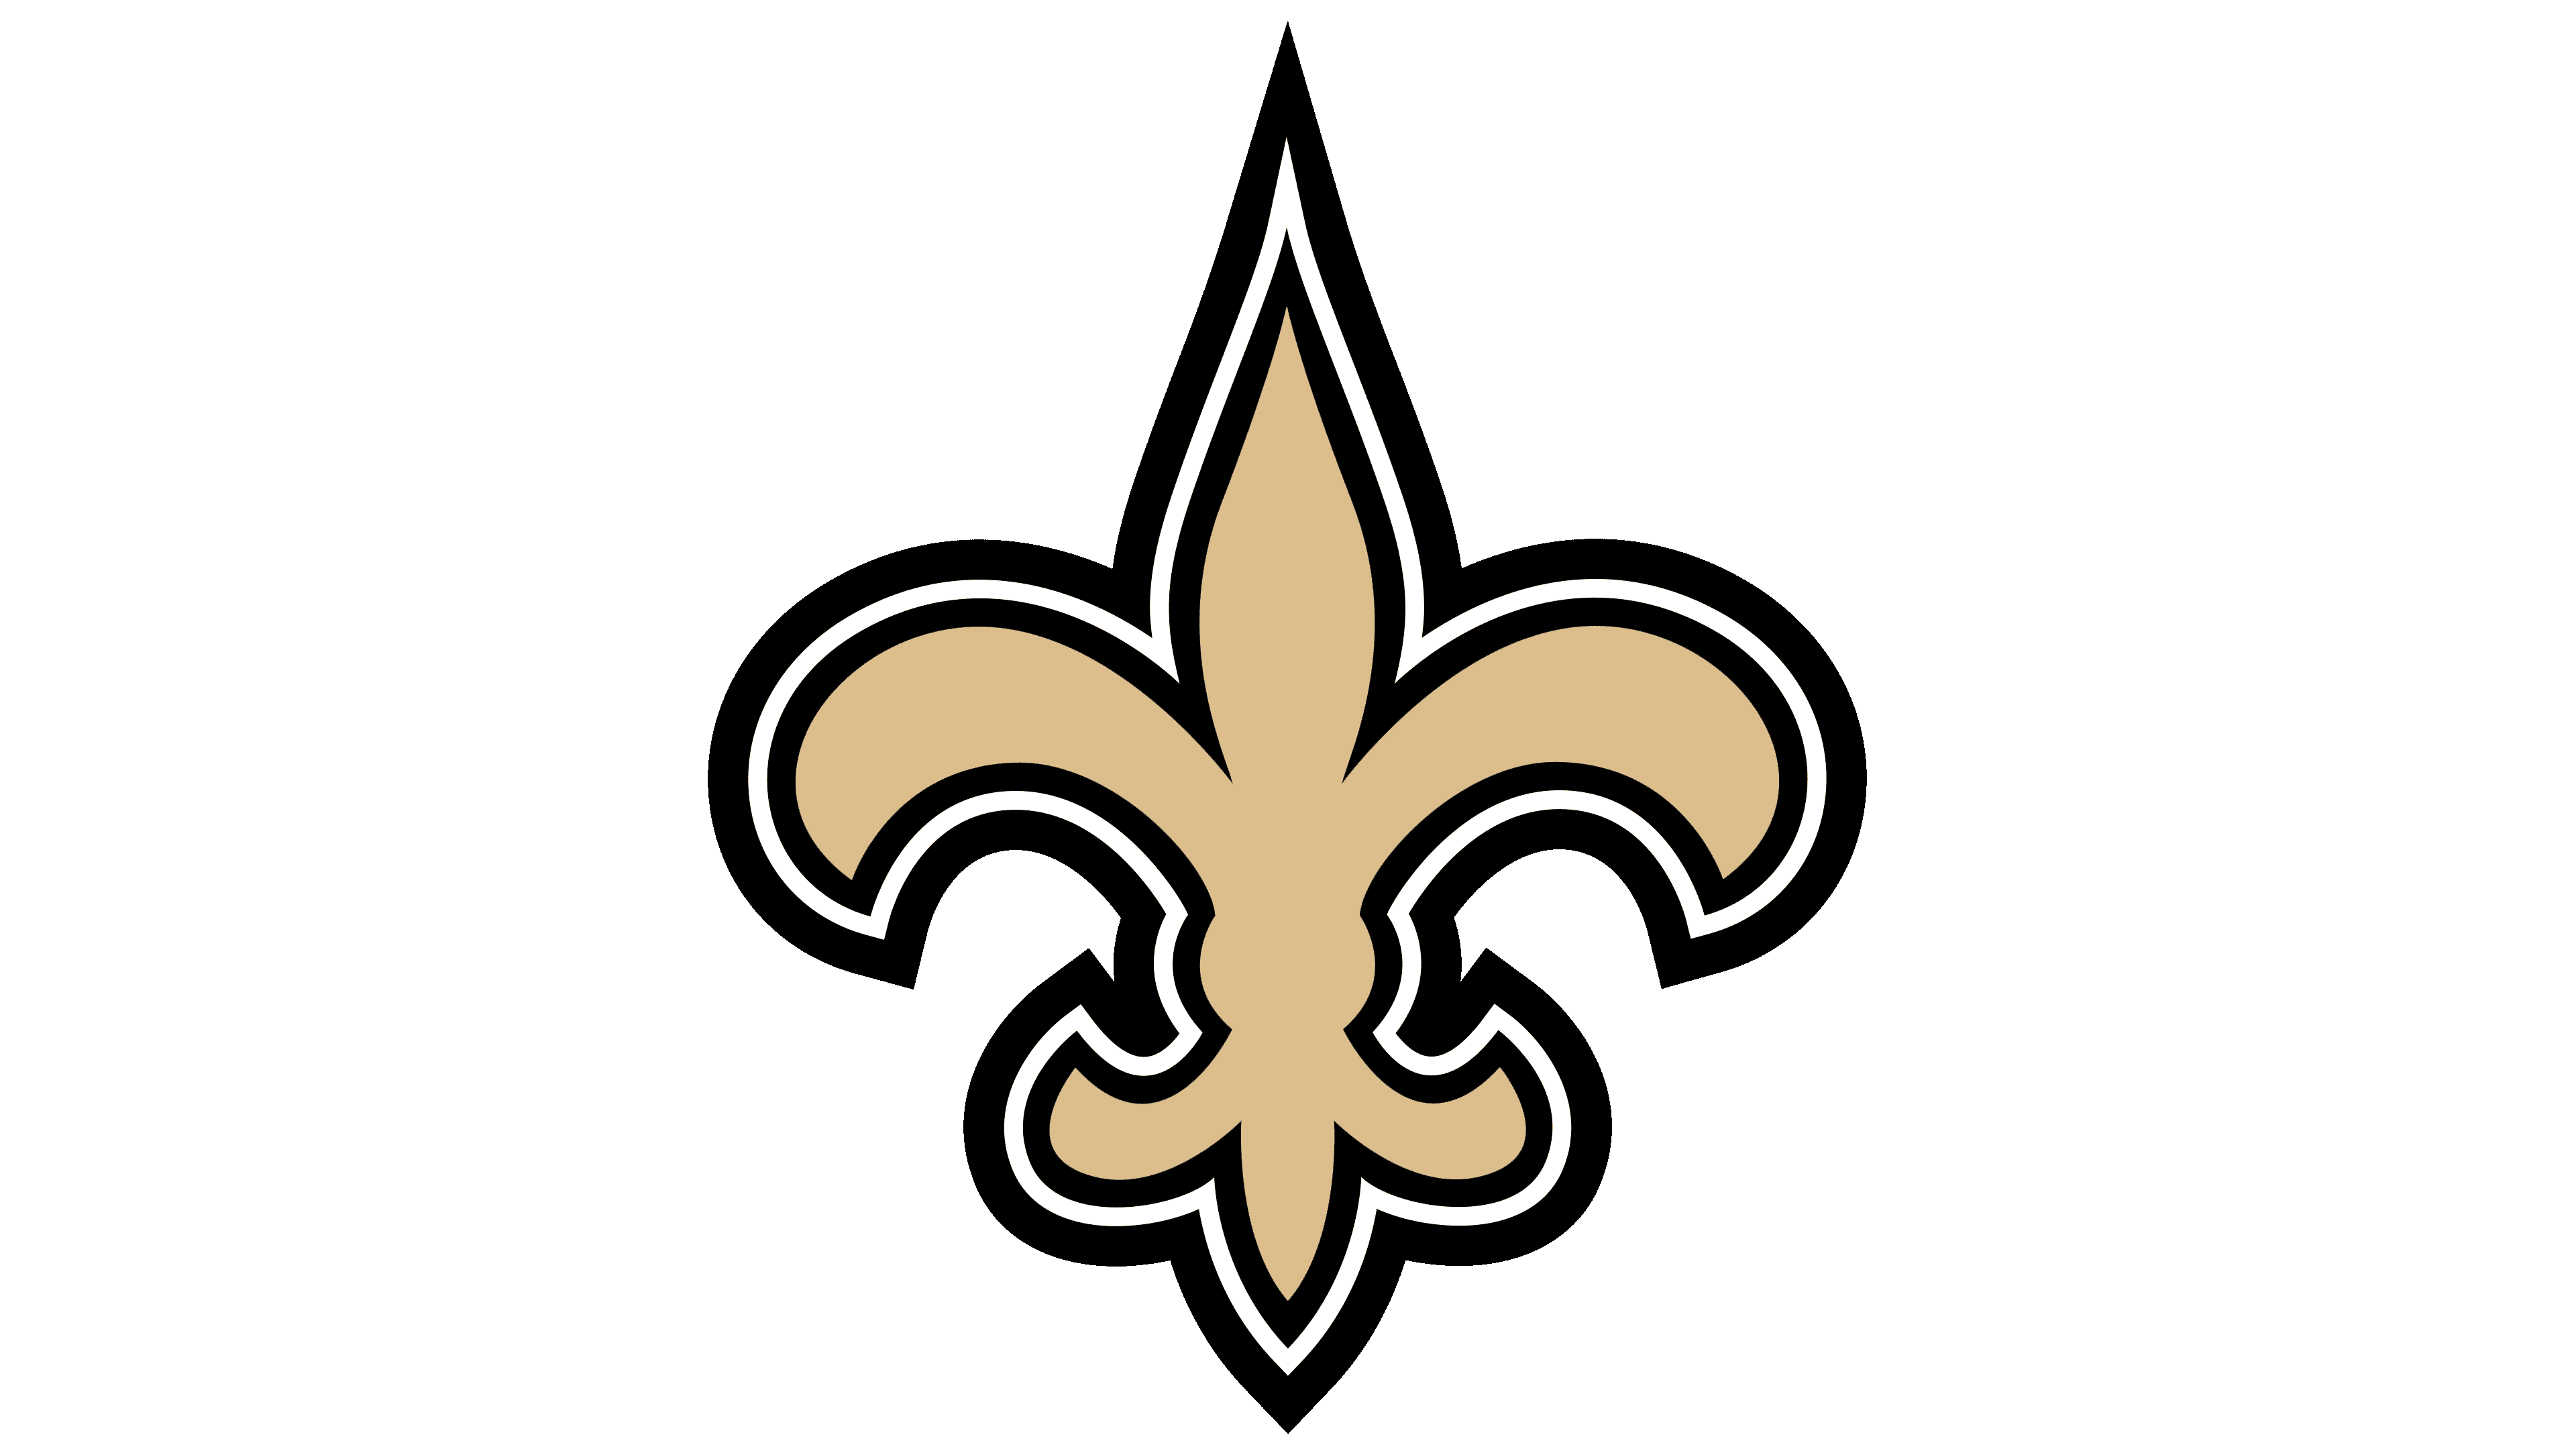 San Francisco 49ers Logo and symbol, meaning, history, PNG, brand